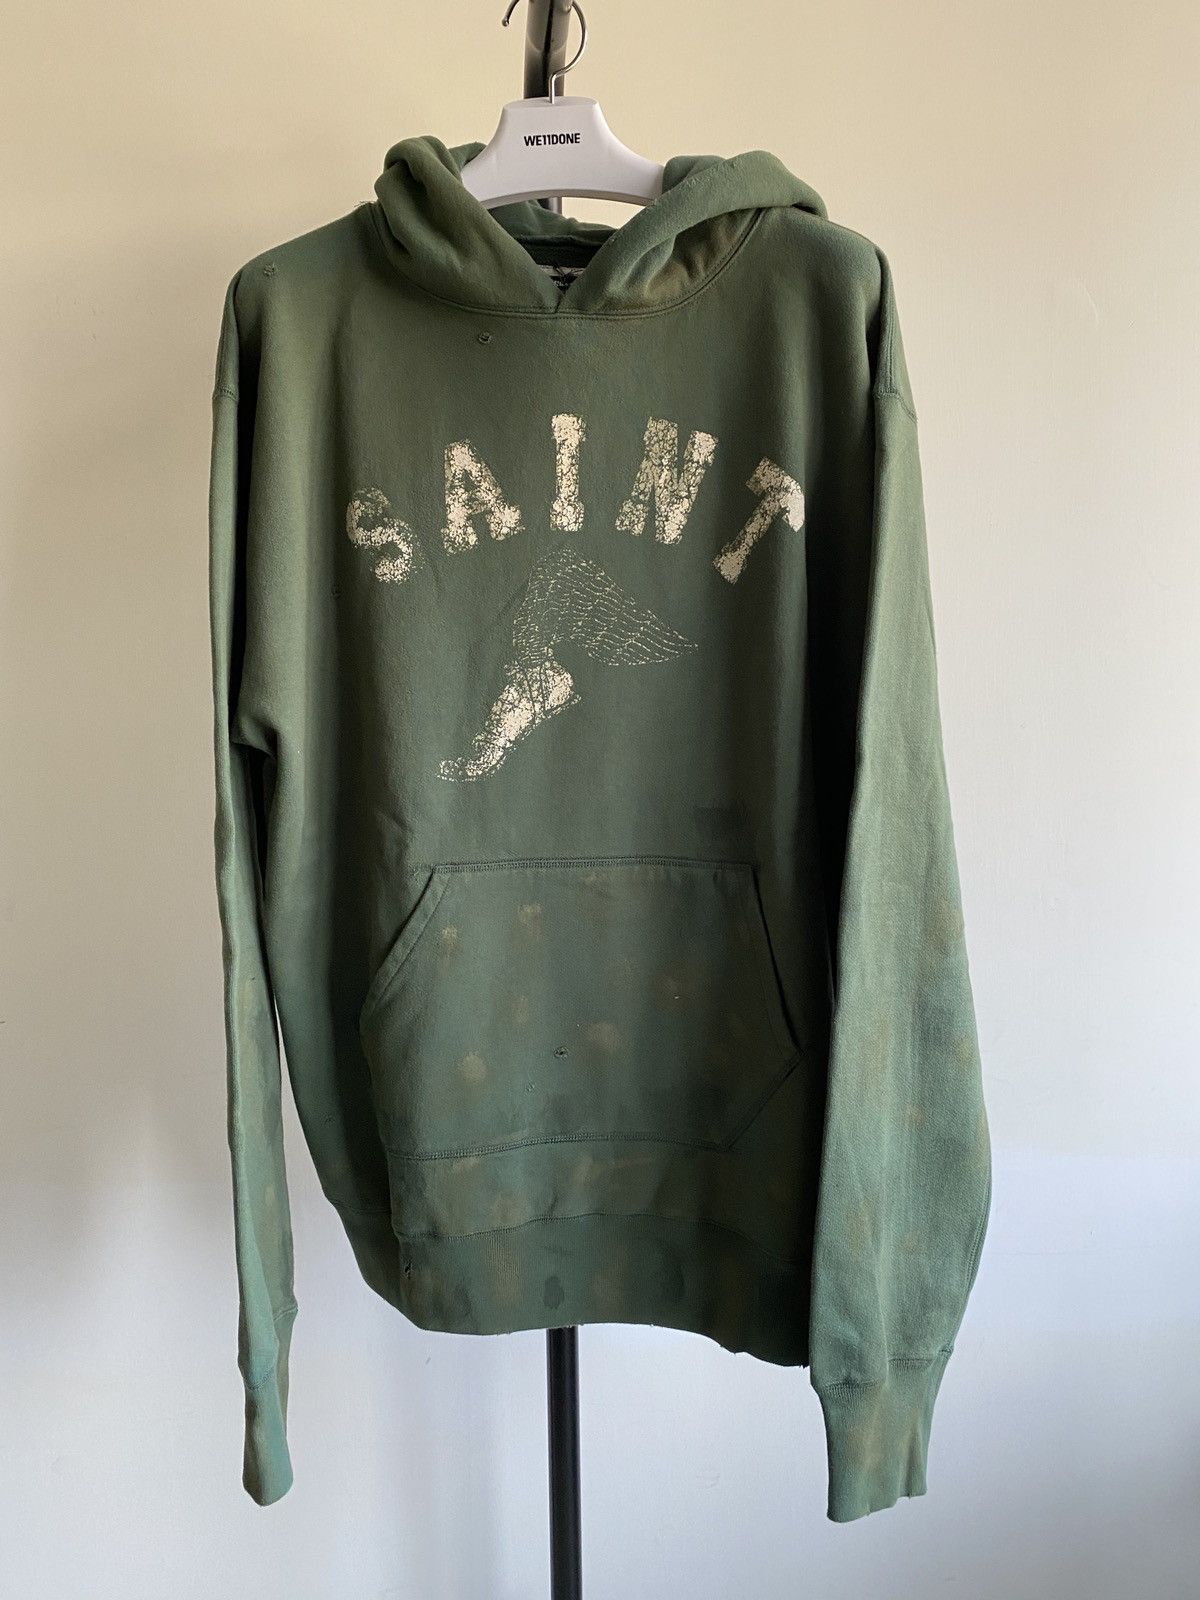 READYMADE Saint Michael army green aged hoodie L | Grailed